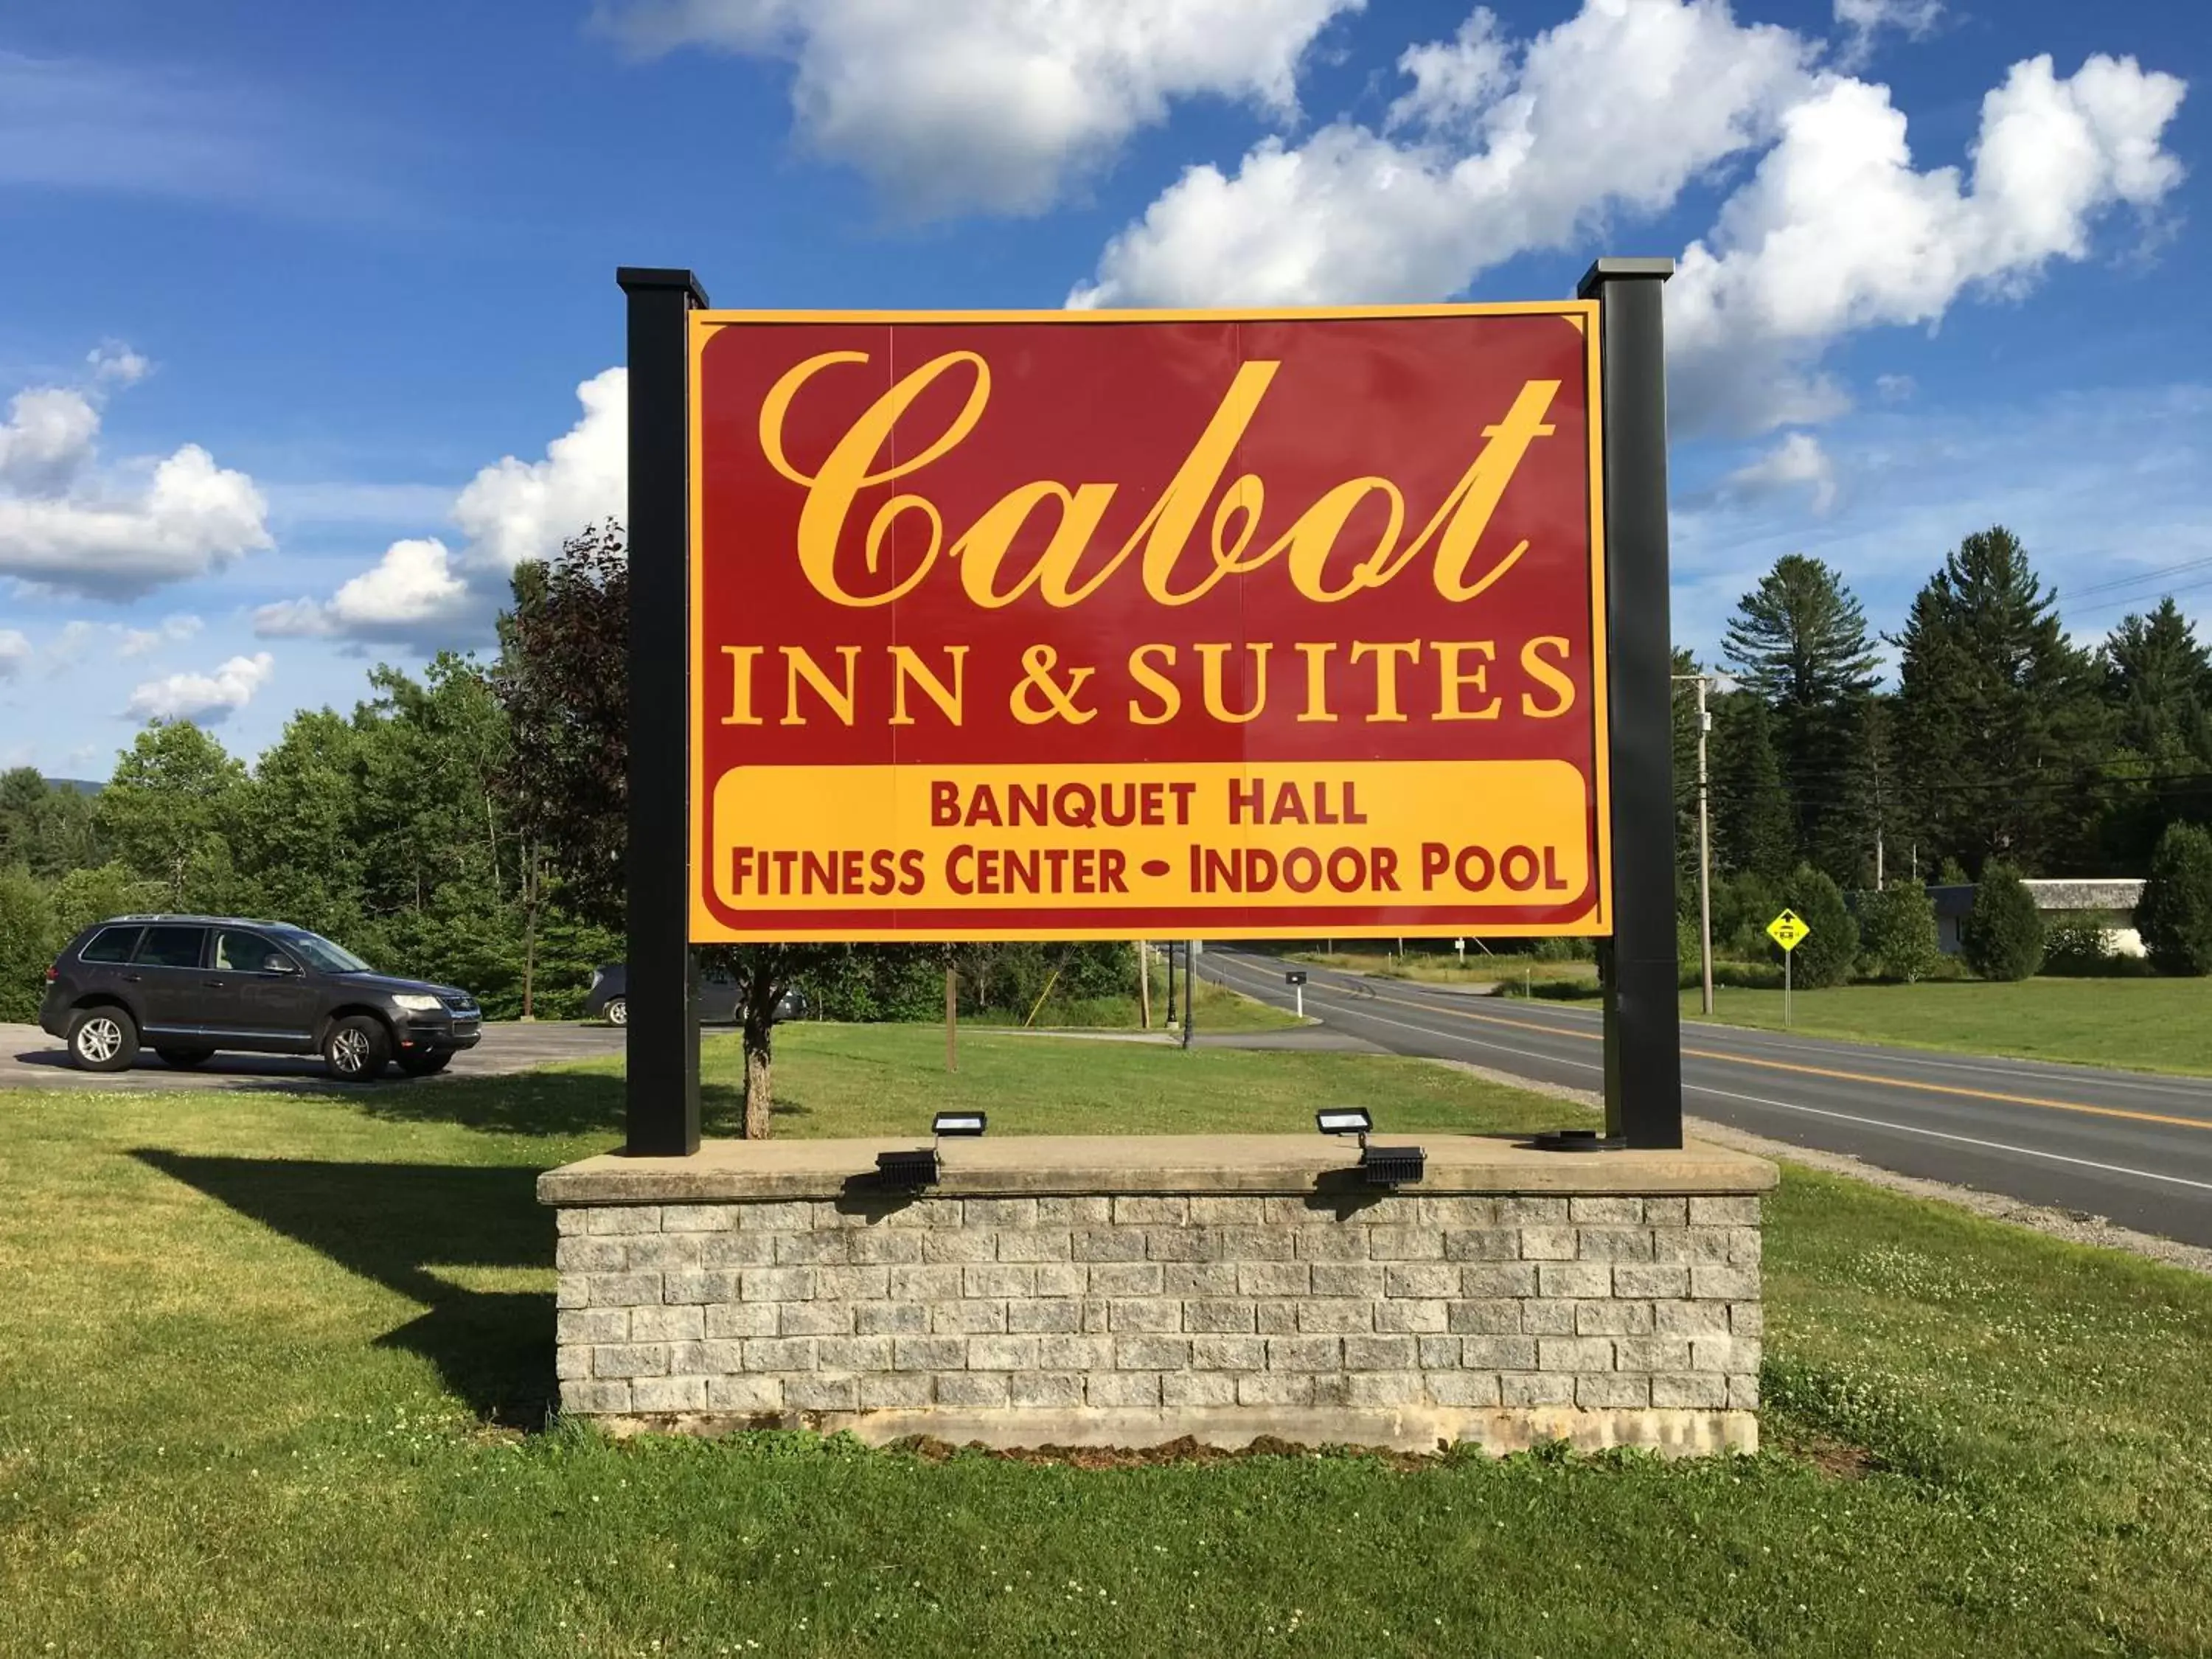 Property logo or sign in Cabot Inn & Suites